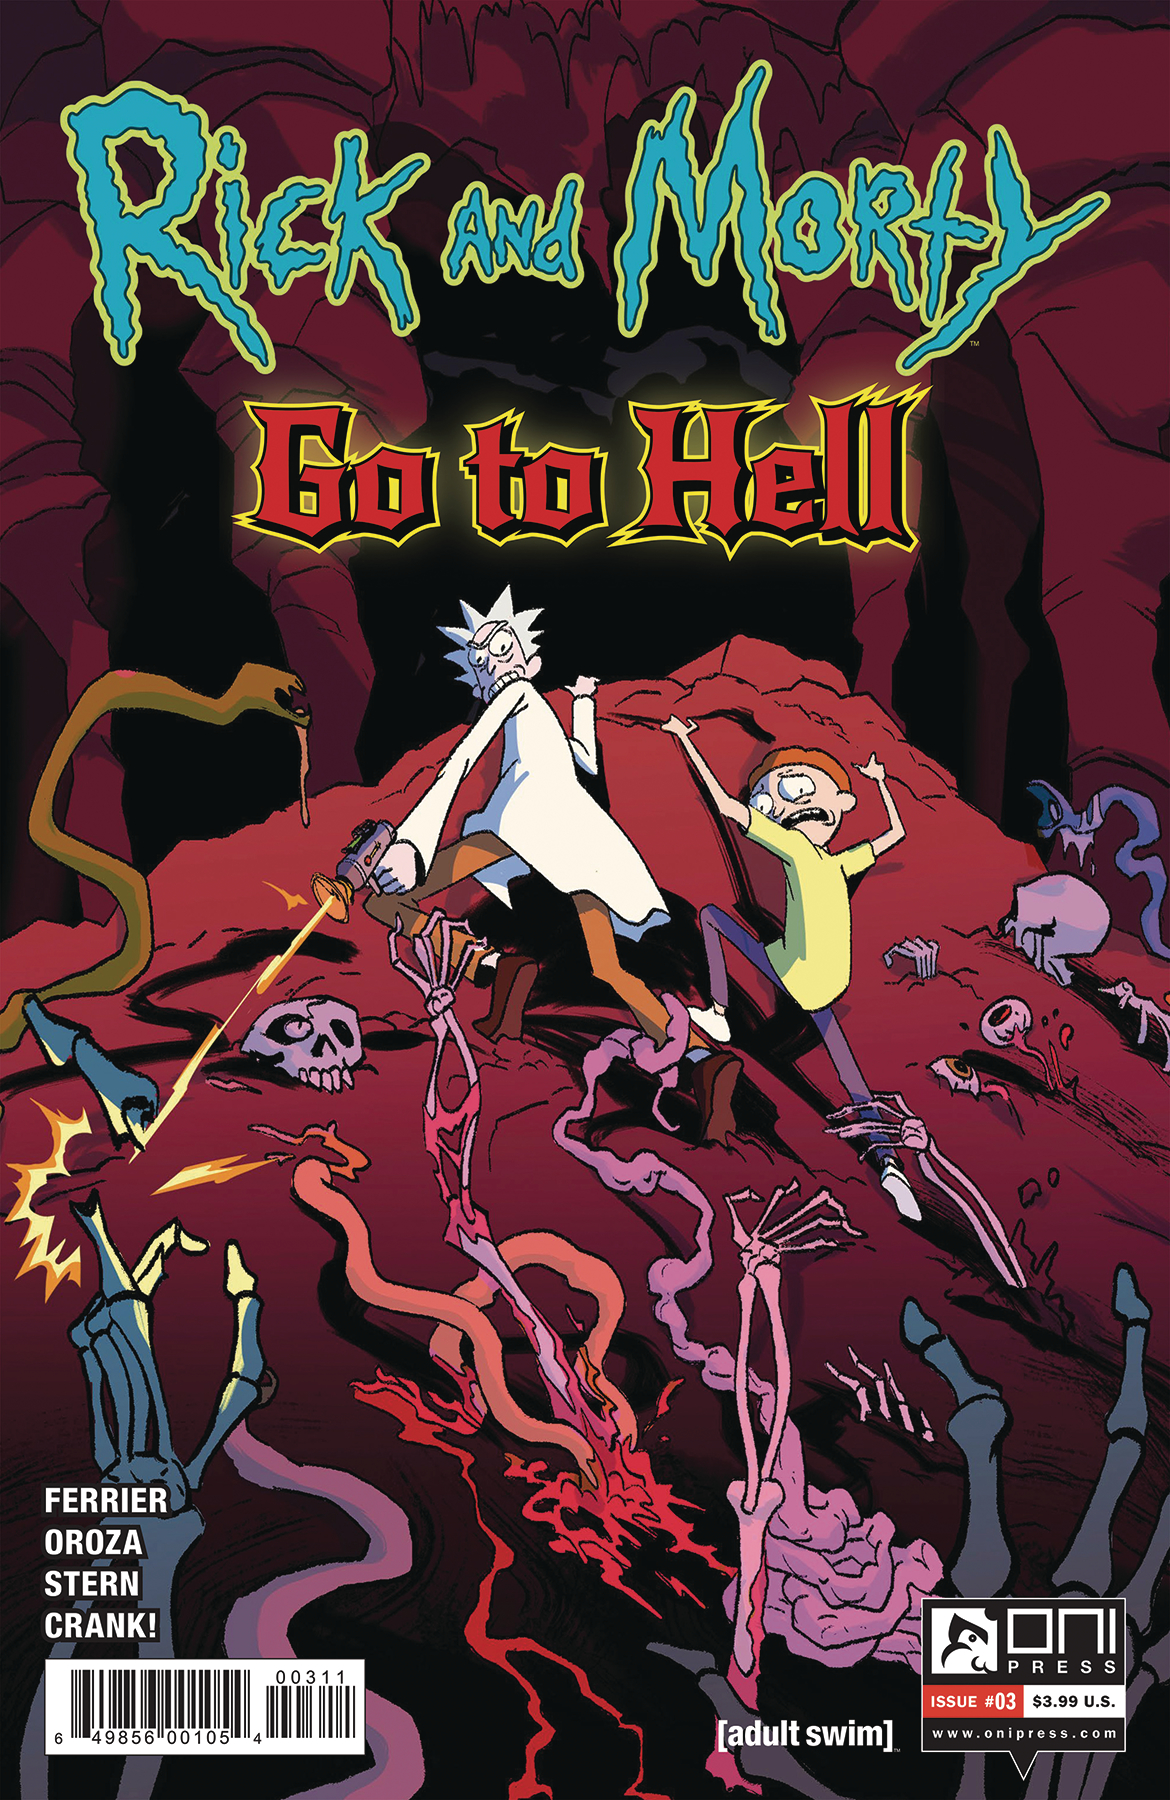 RICK AND MORTY GO TO HELL #3 CVR A OROZA